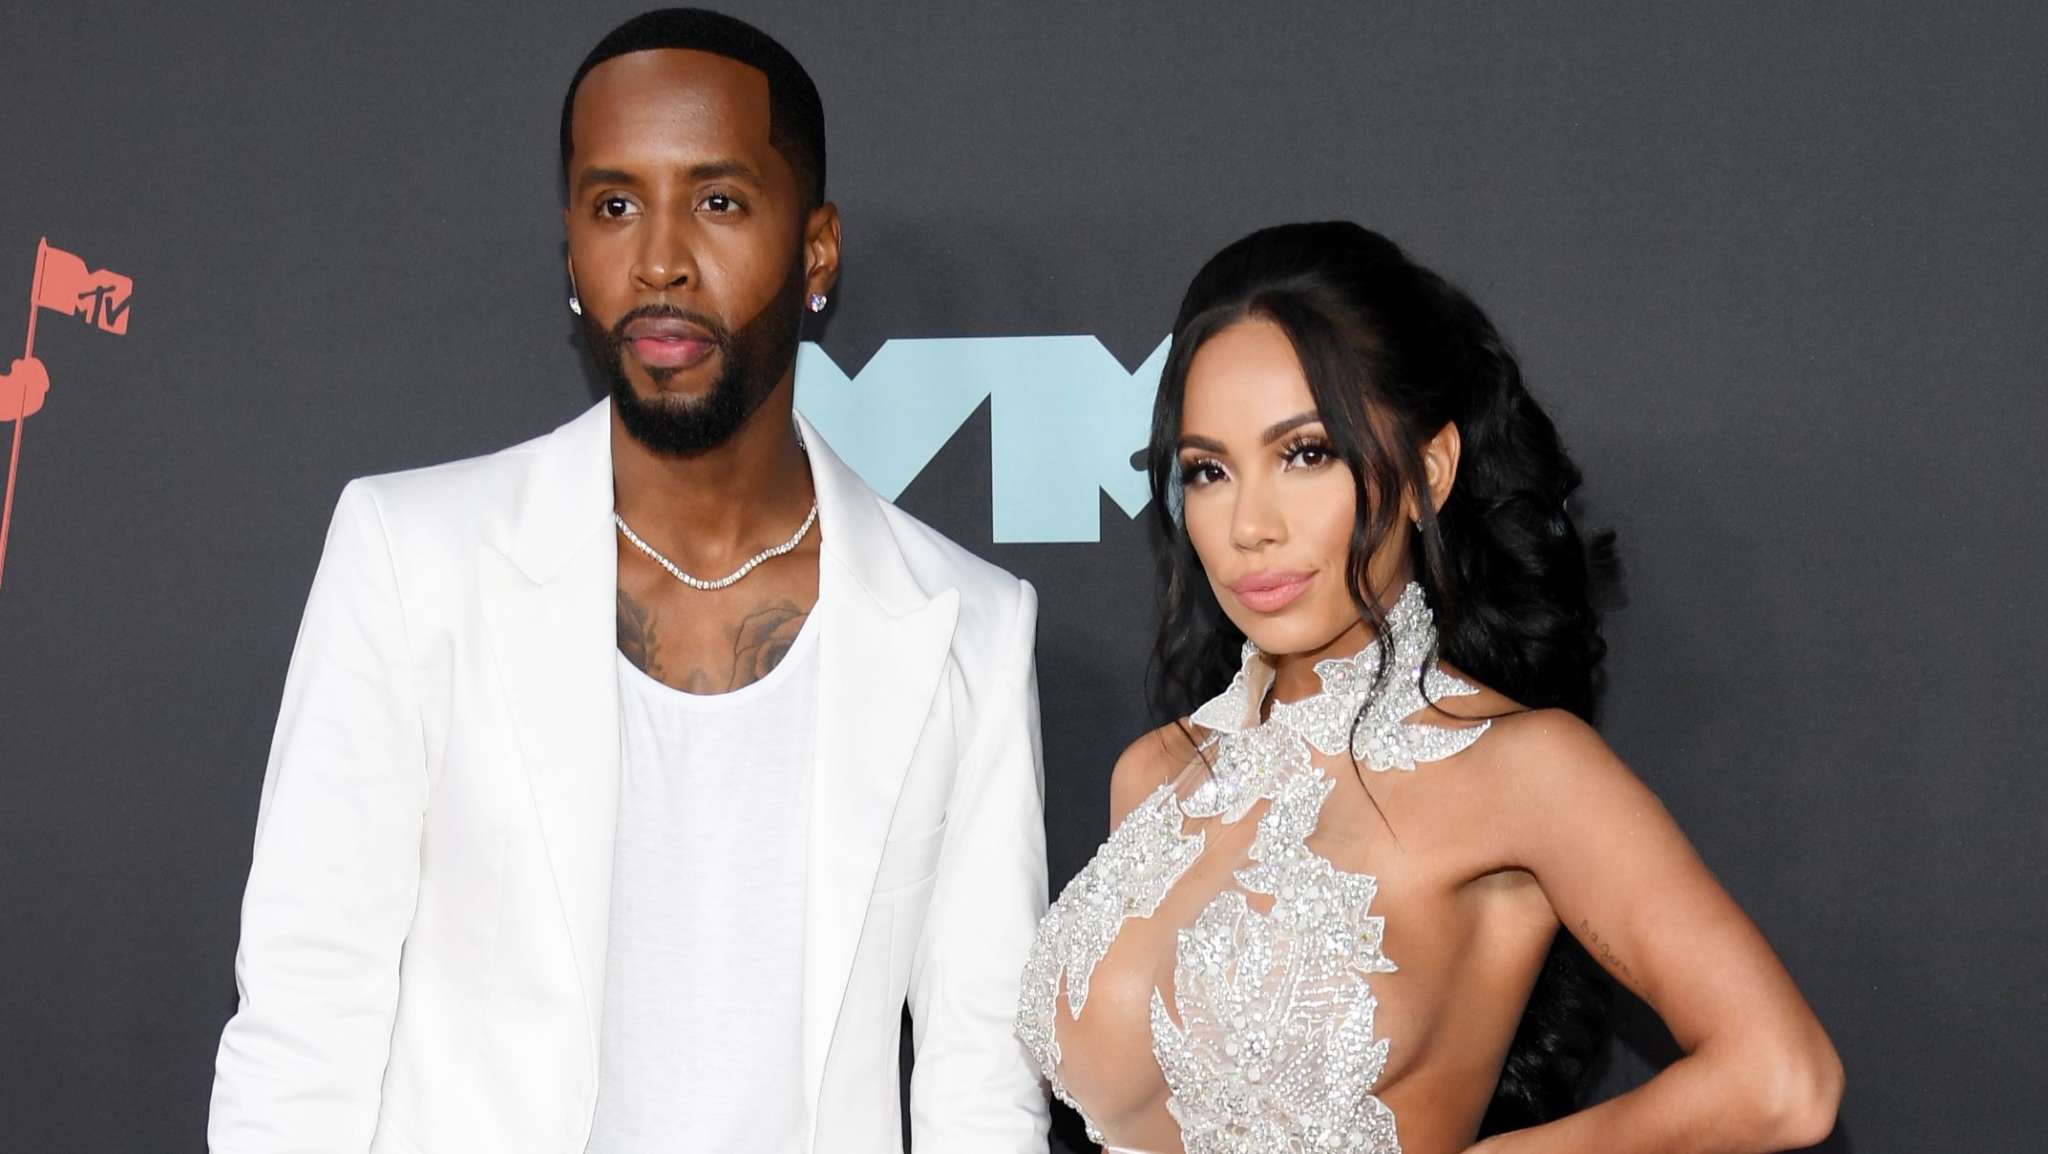 Erica Mena Praises Safaree For Father's Day - See The Video Featuring The Proud Father With Their Daughter